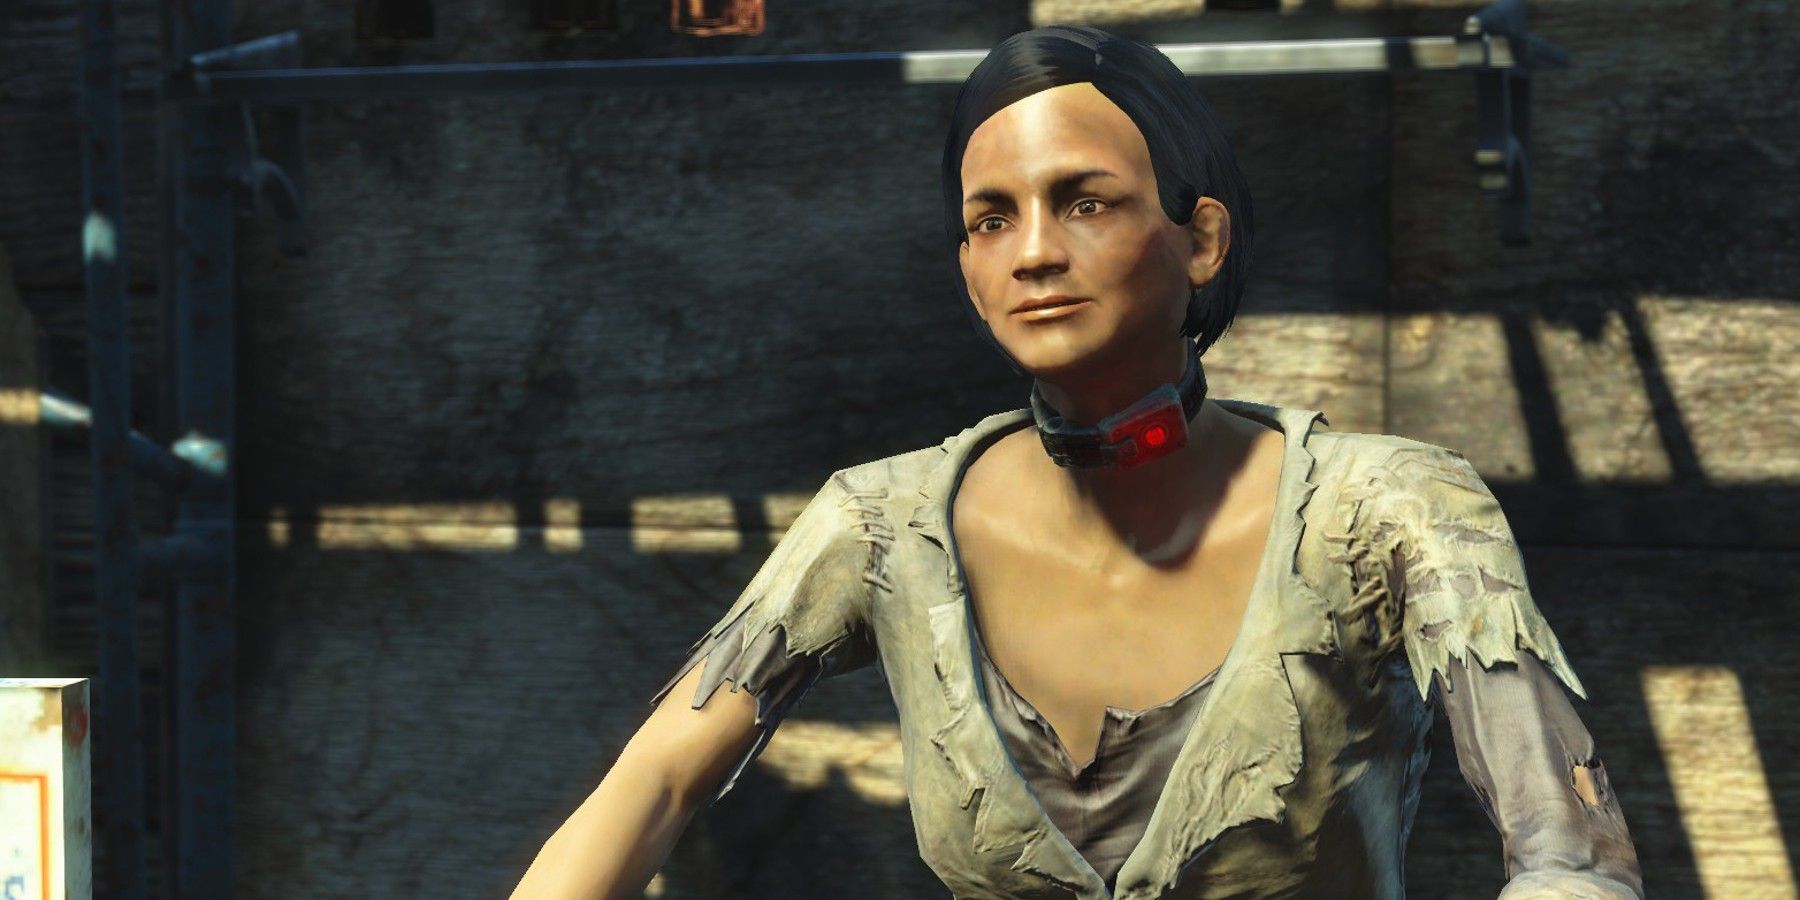 Fallout 4 Player Points Out Issue with Shelbie
Dialogue